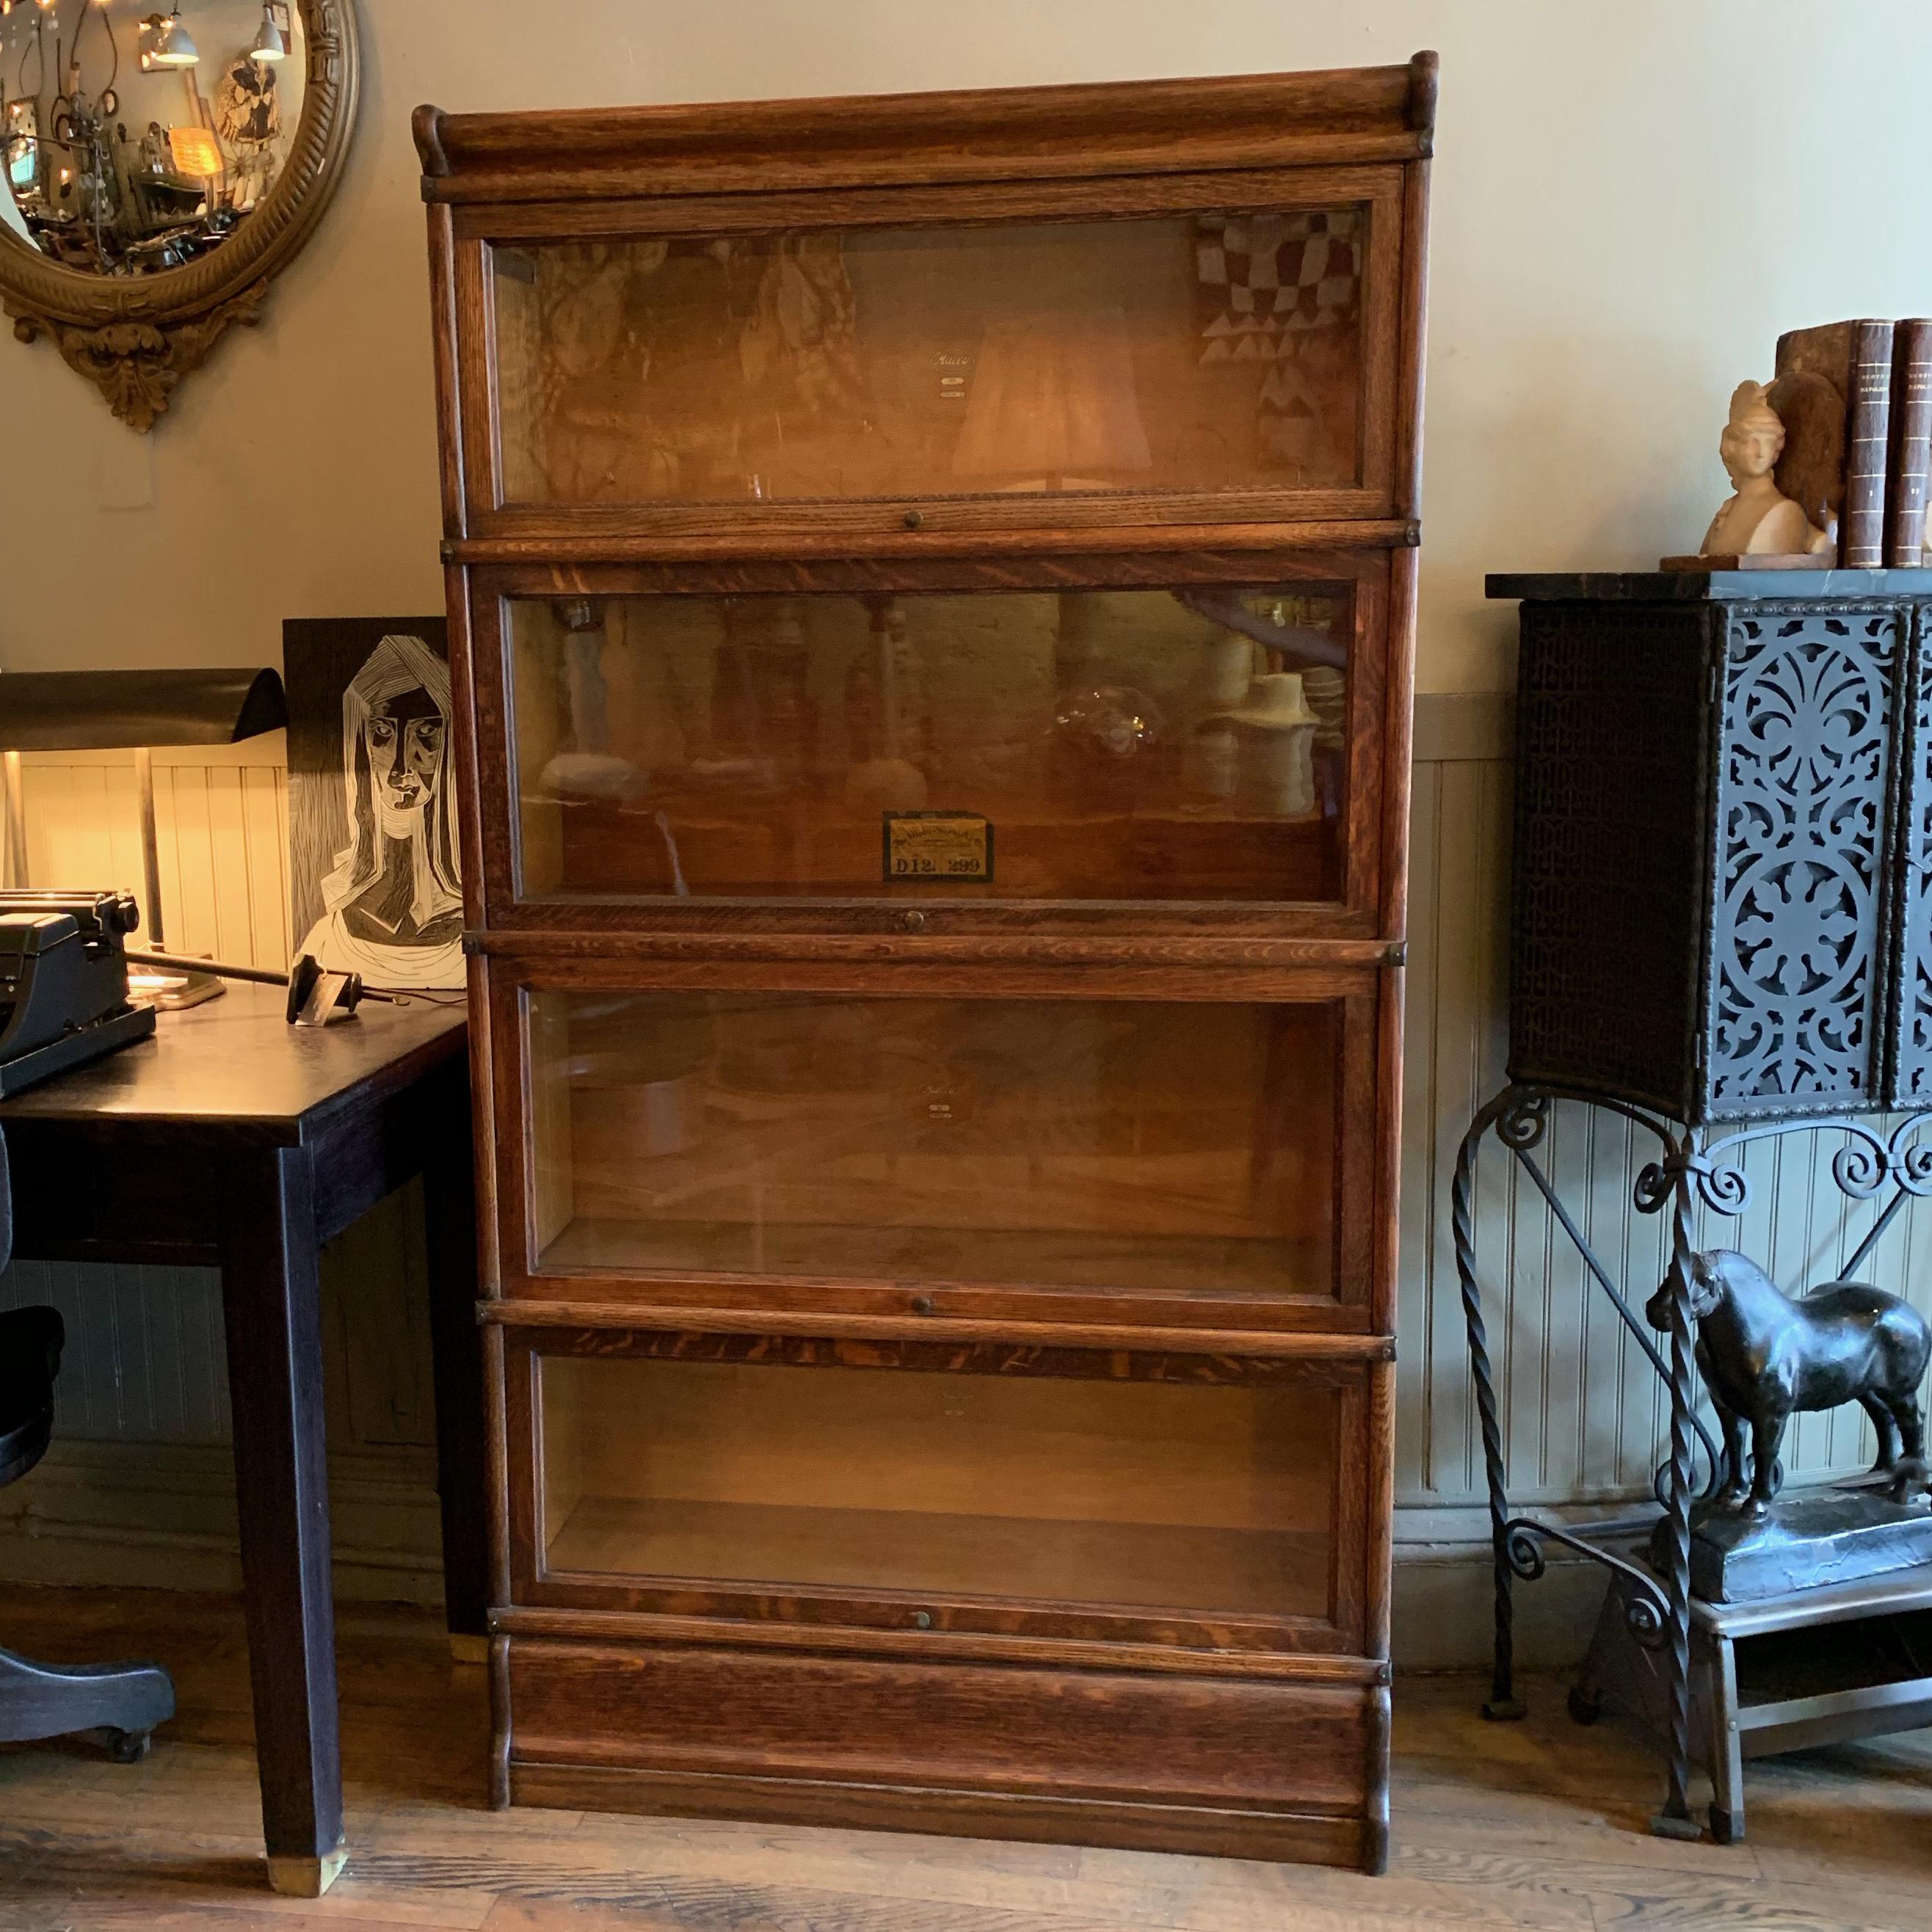 Early 20th century, four-stack, sectional bookcase, barrister case by The Globe Wernicke Co. features interlocking stacks of oak with glass fronts and steel scissor hinges, circa 1920s.

Macey stickers are from manufacturer The Macey Co. which